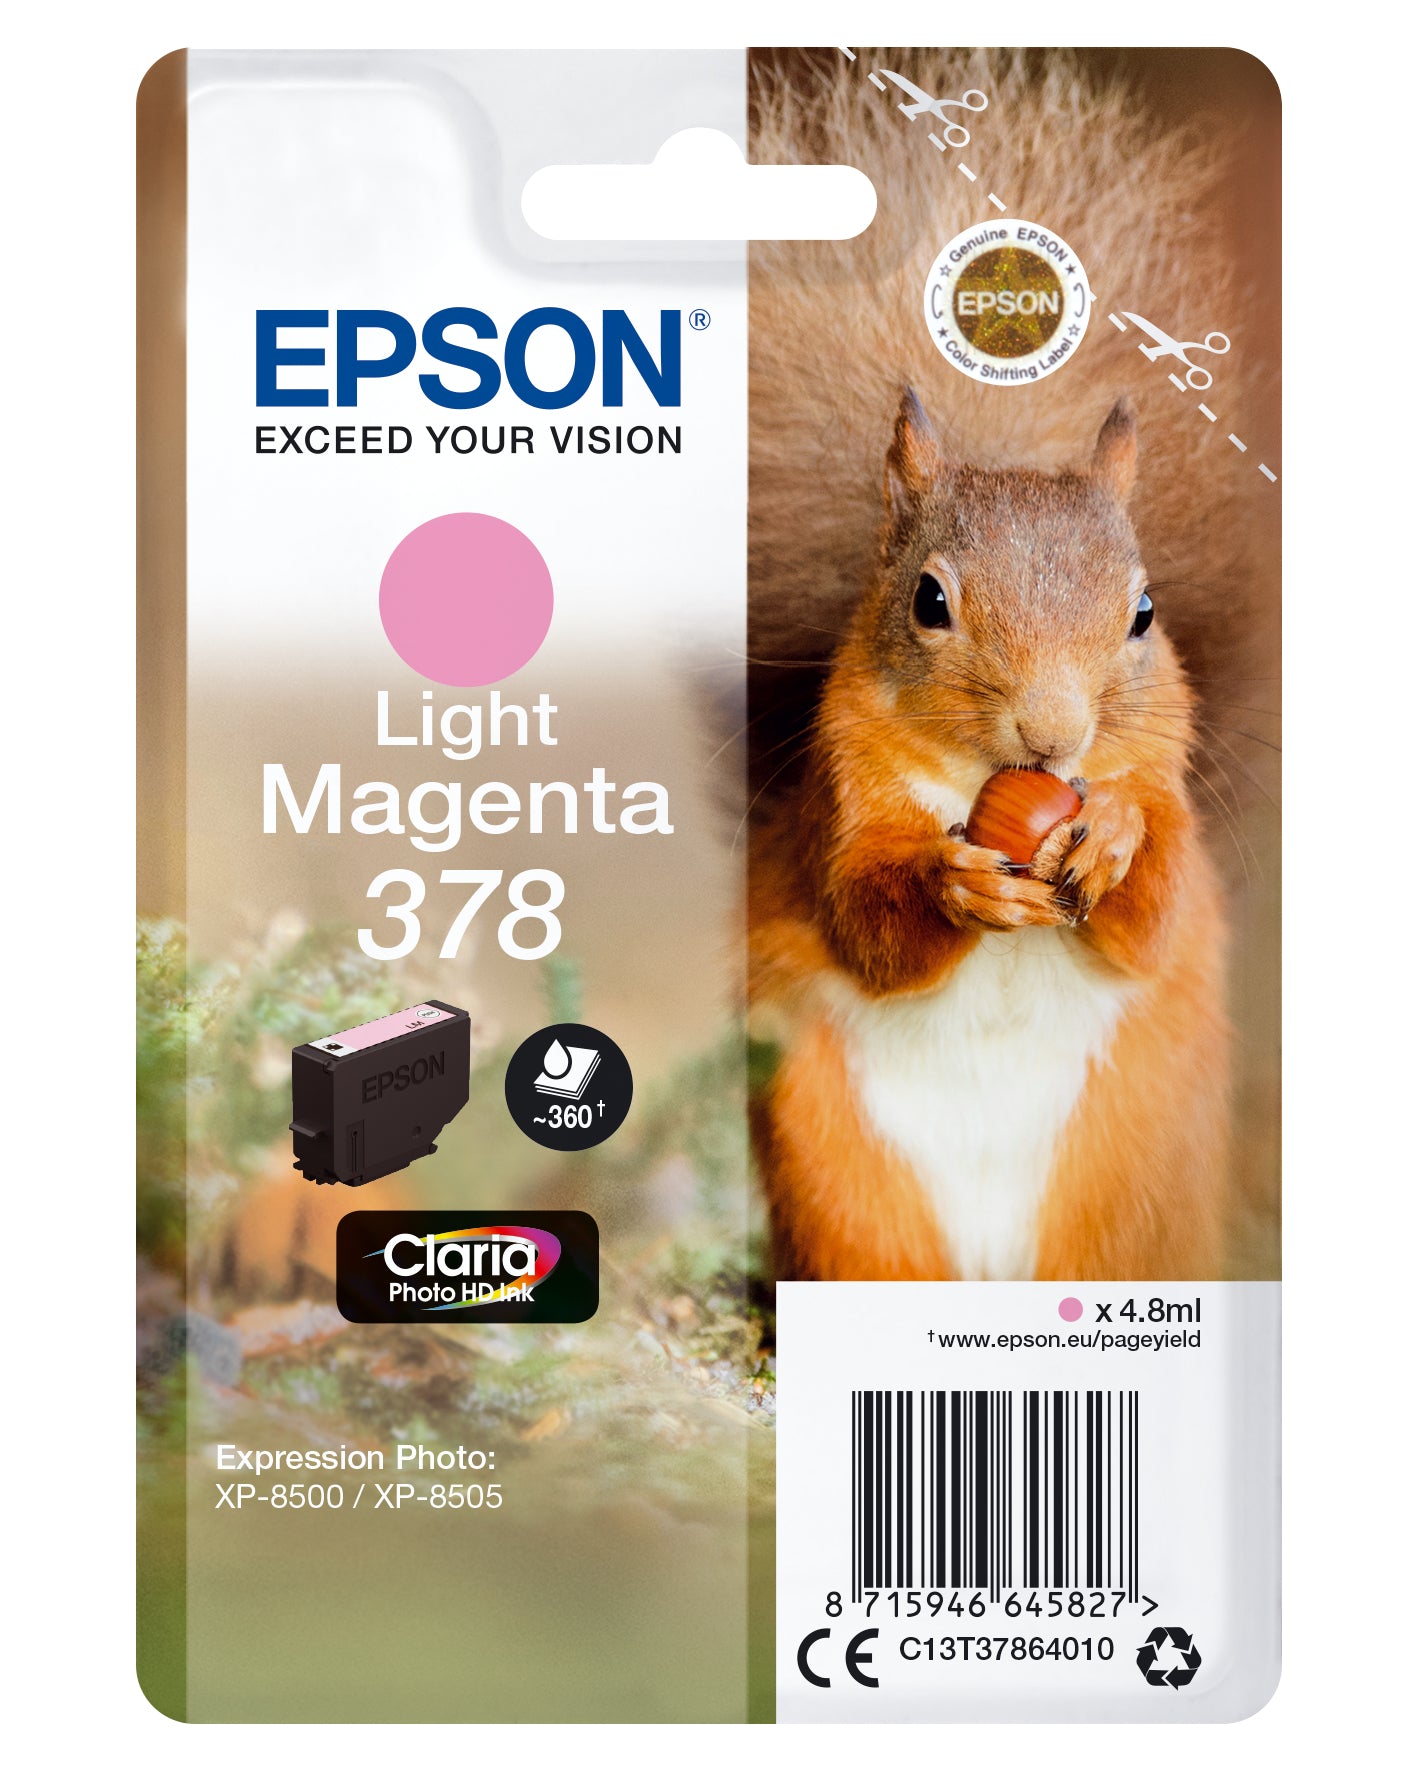 Epson C13T37864010/378 Ink cartridge light magenta, 360 pages 4,8ml for Epson XP 8000